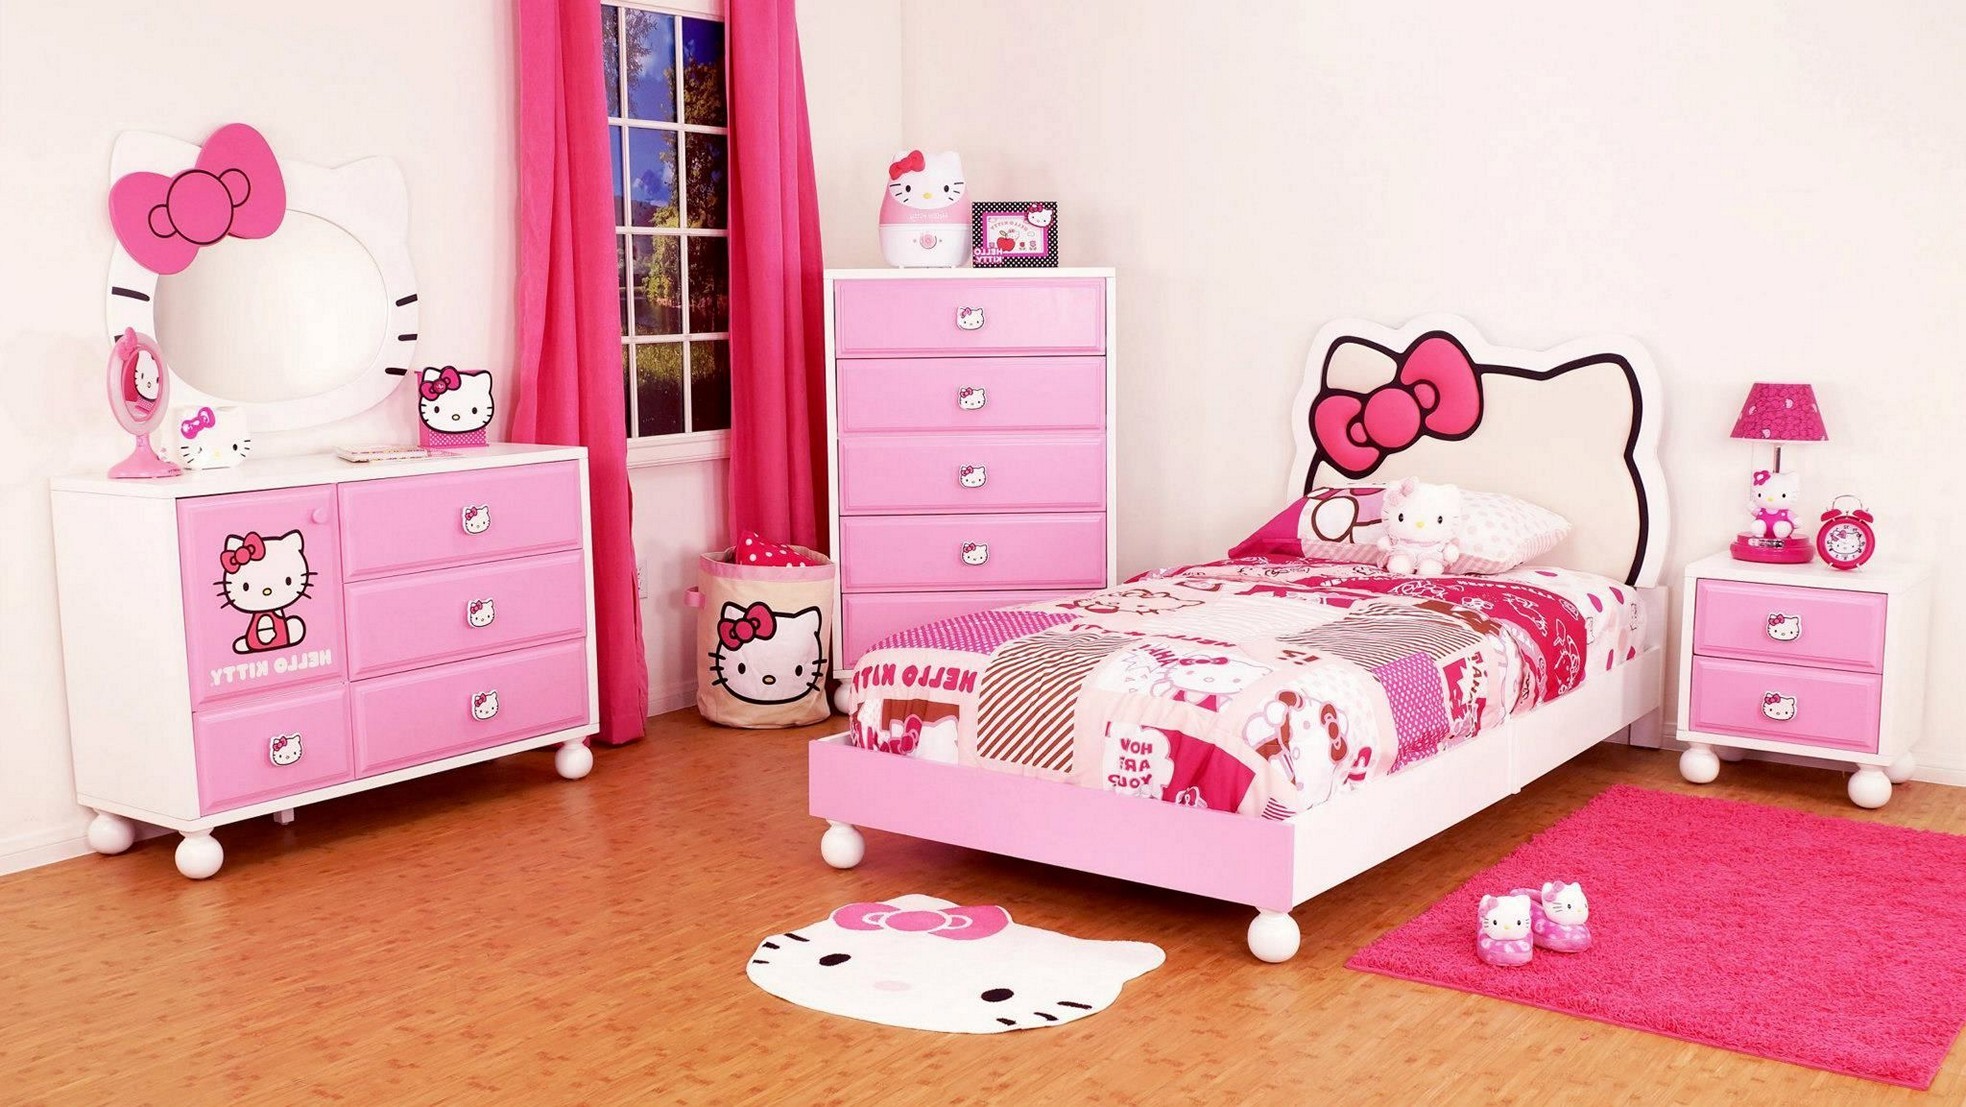 1966x1107 hello kitty home decorations hello kitty room design ideas haammss small  home remodel ideas